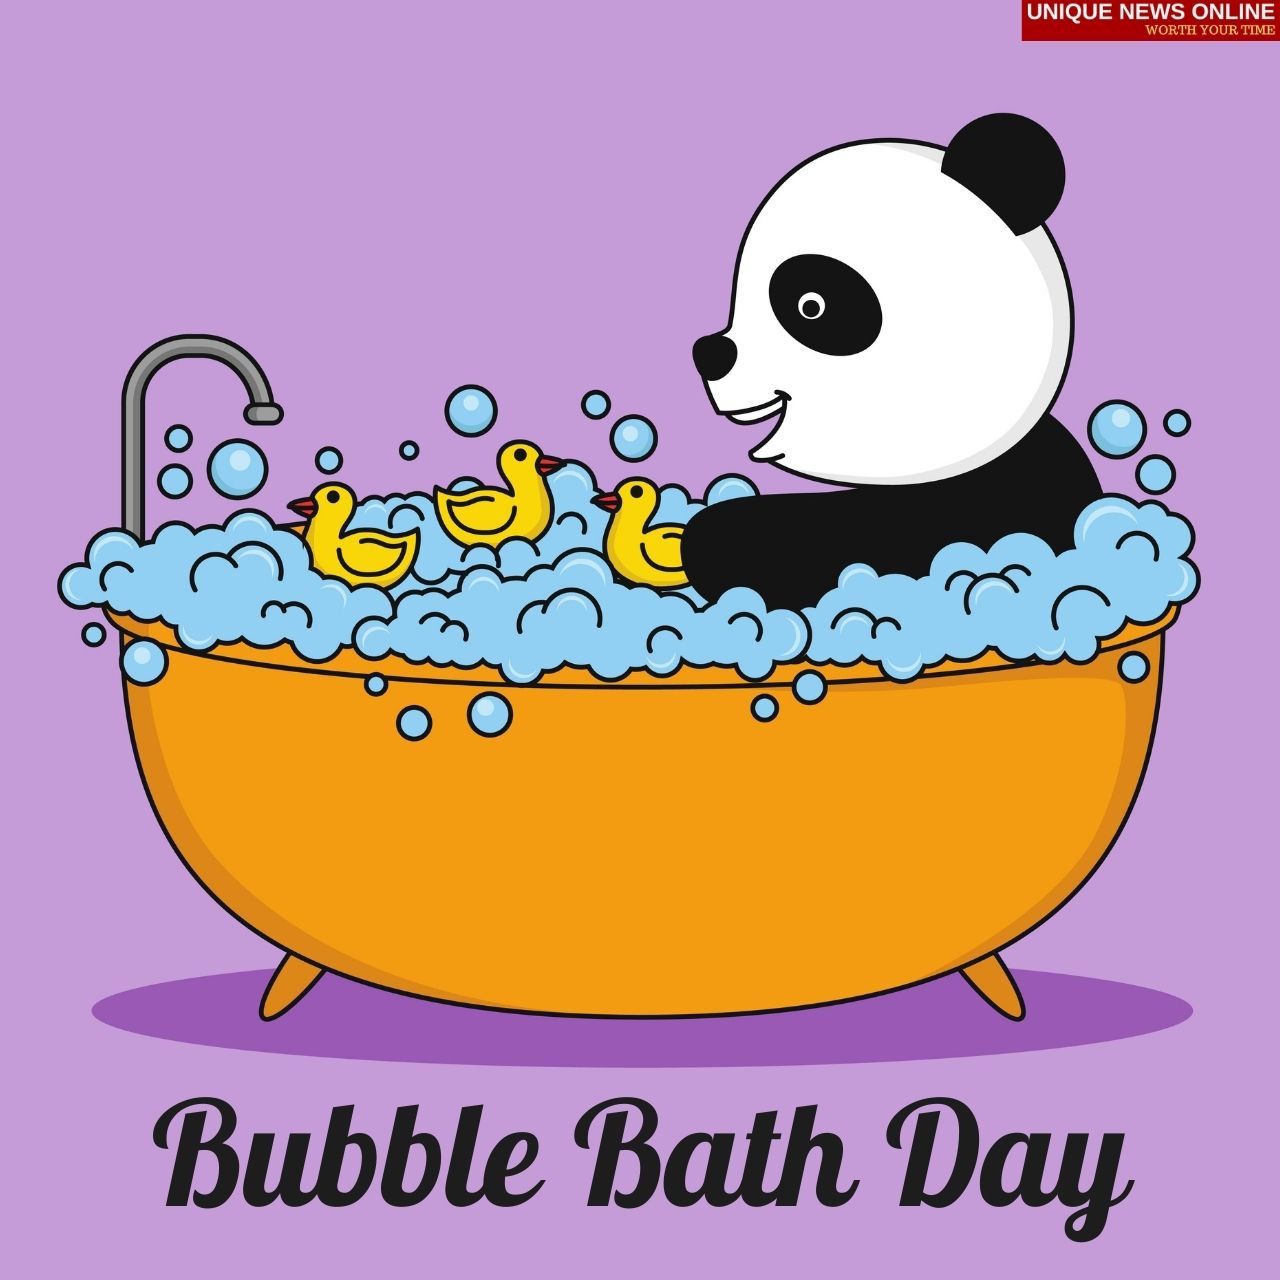 Bubble Bath Day 2022 Quotes, Sayings, Images, Wishes, Instagram Captions to share